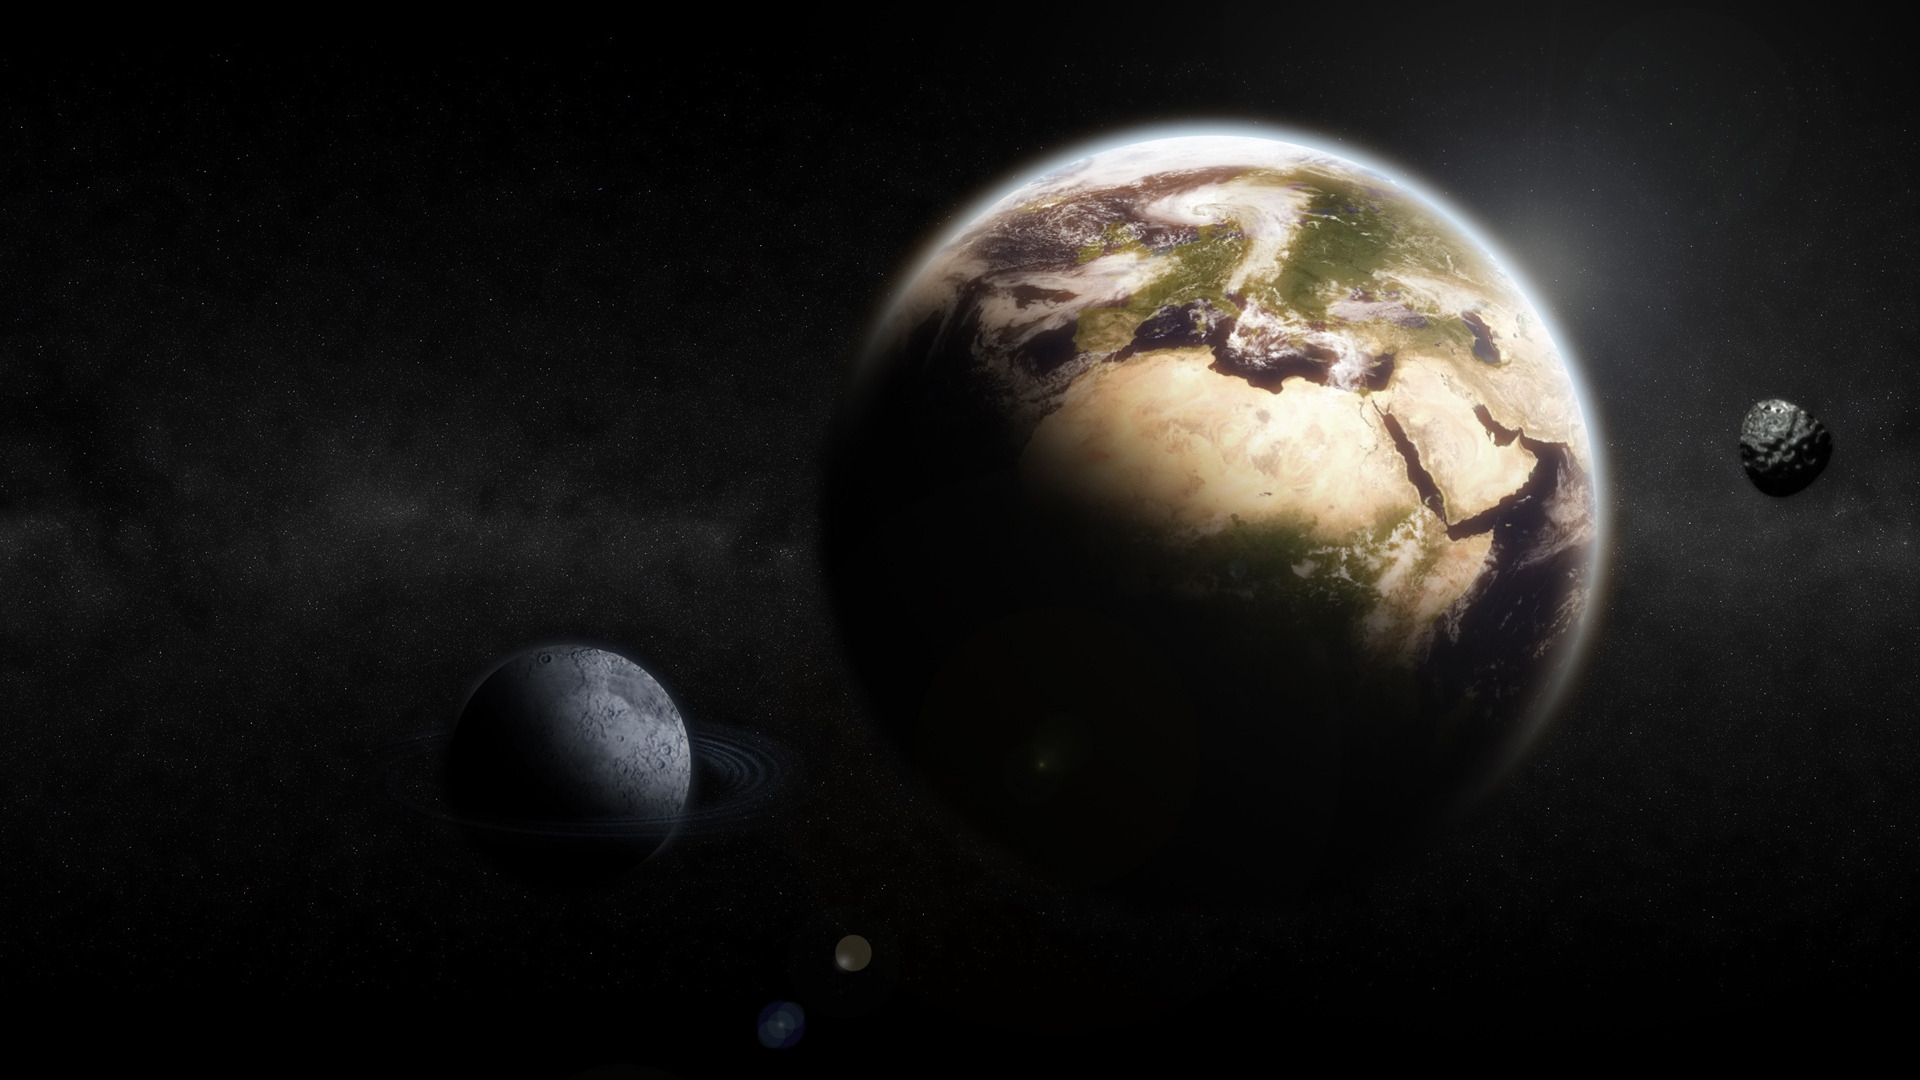 Earth & Moon for 1920 x 1080 HDTV 1080p resolution